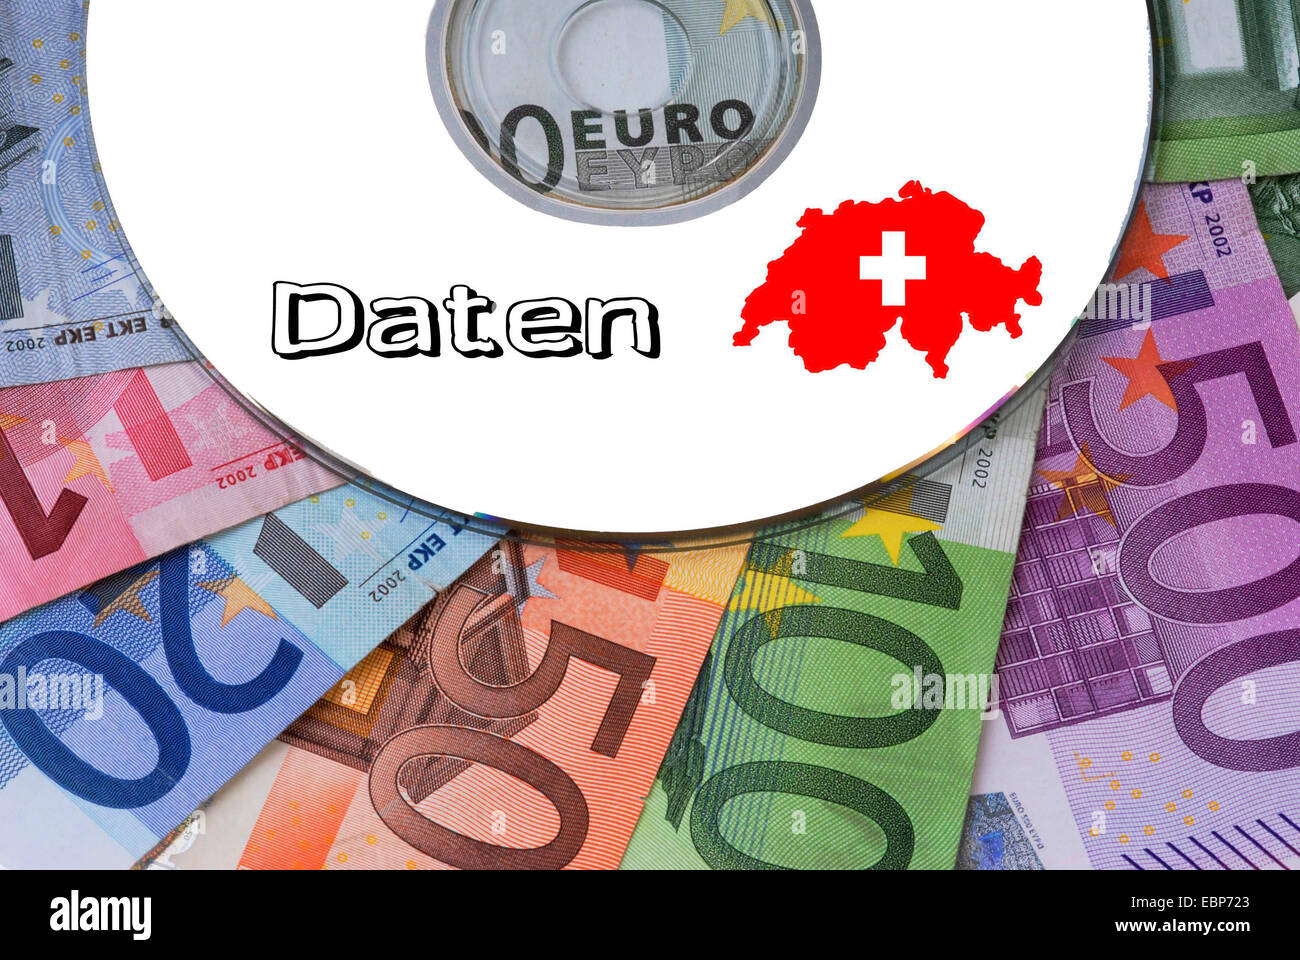 bought data CD from Suisse, Switzerland Stock Photo